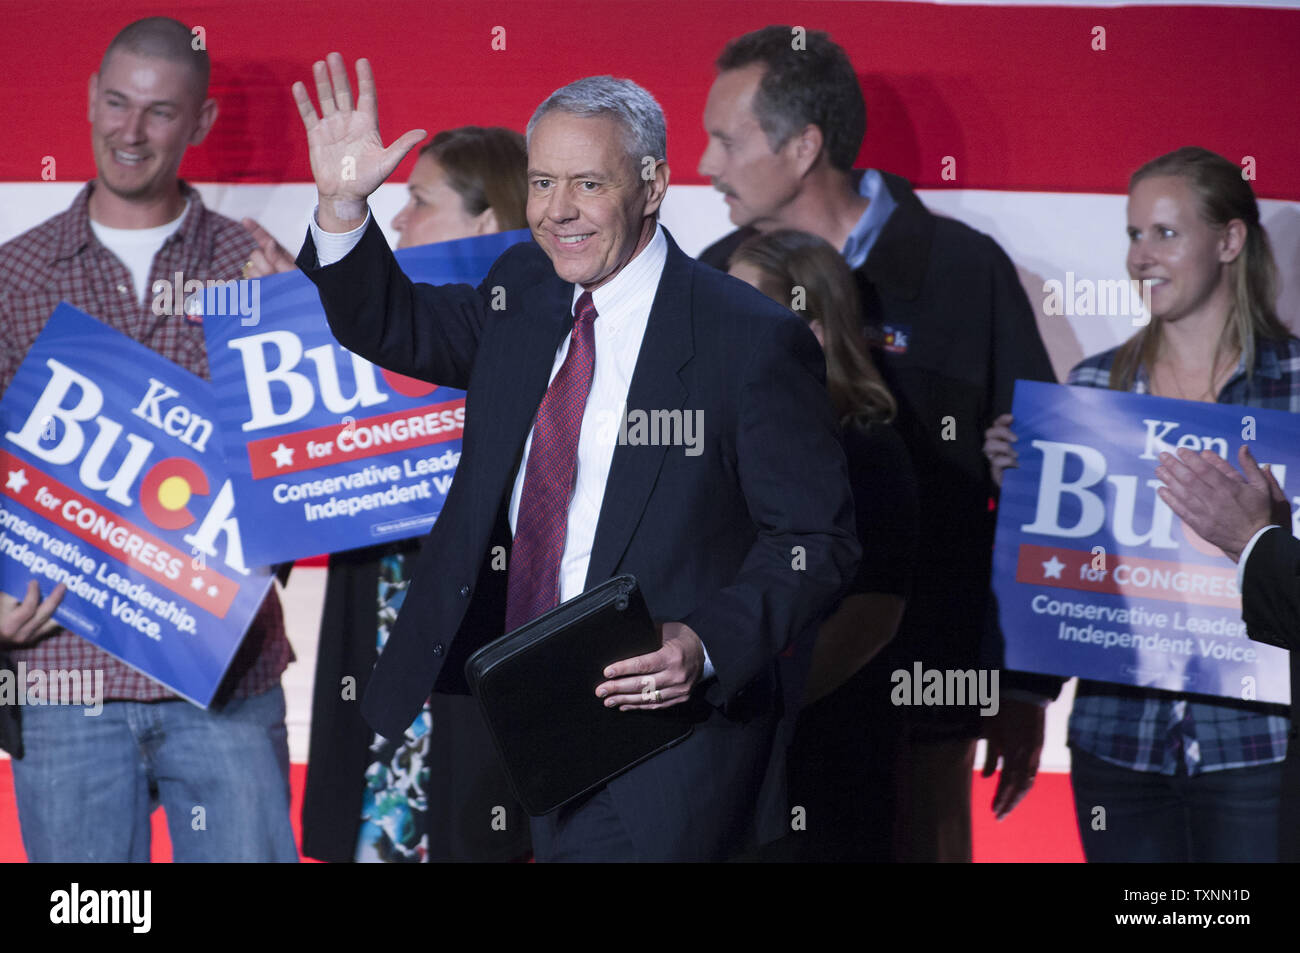 Newly elected Congressman Republican Ken Buck waves to supporters at the Colorado Republican Party Election Night party in Greenwood Village, Colorado on November 4, 2014.  UPI/Gary C. Caskey Stock Photo